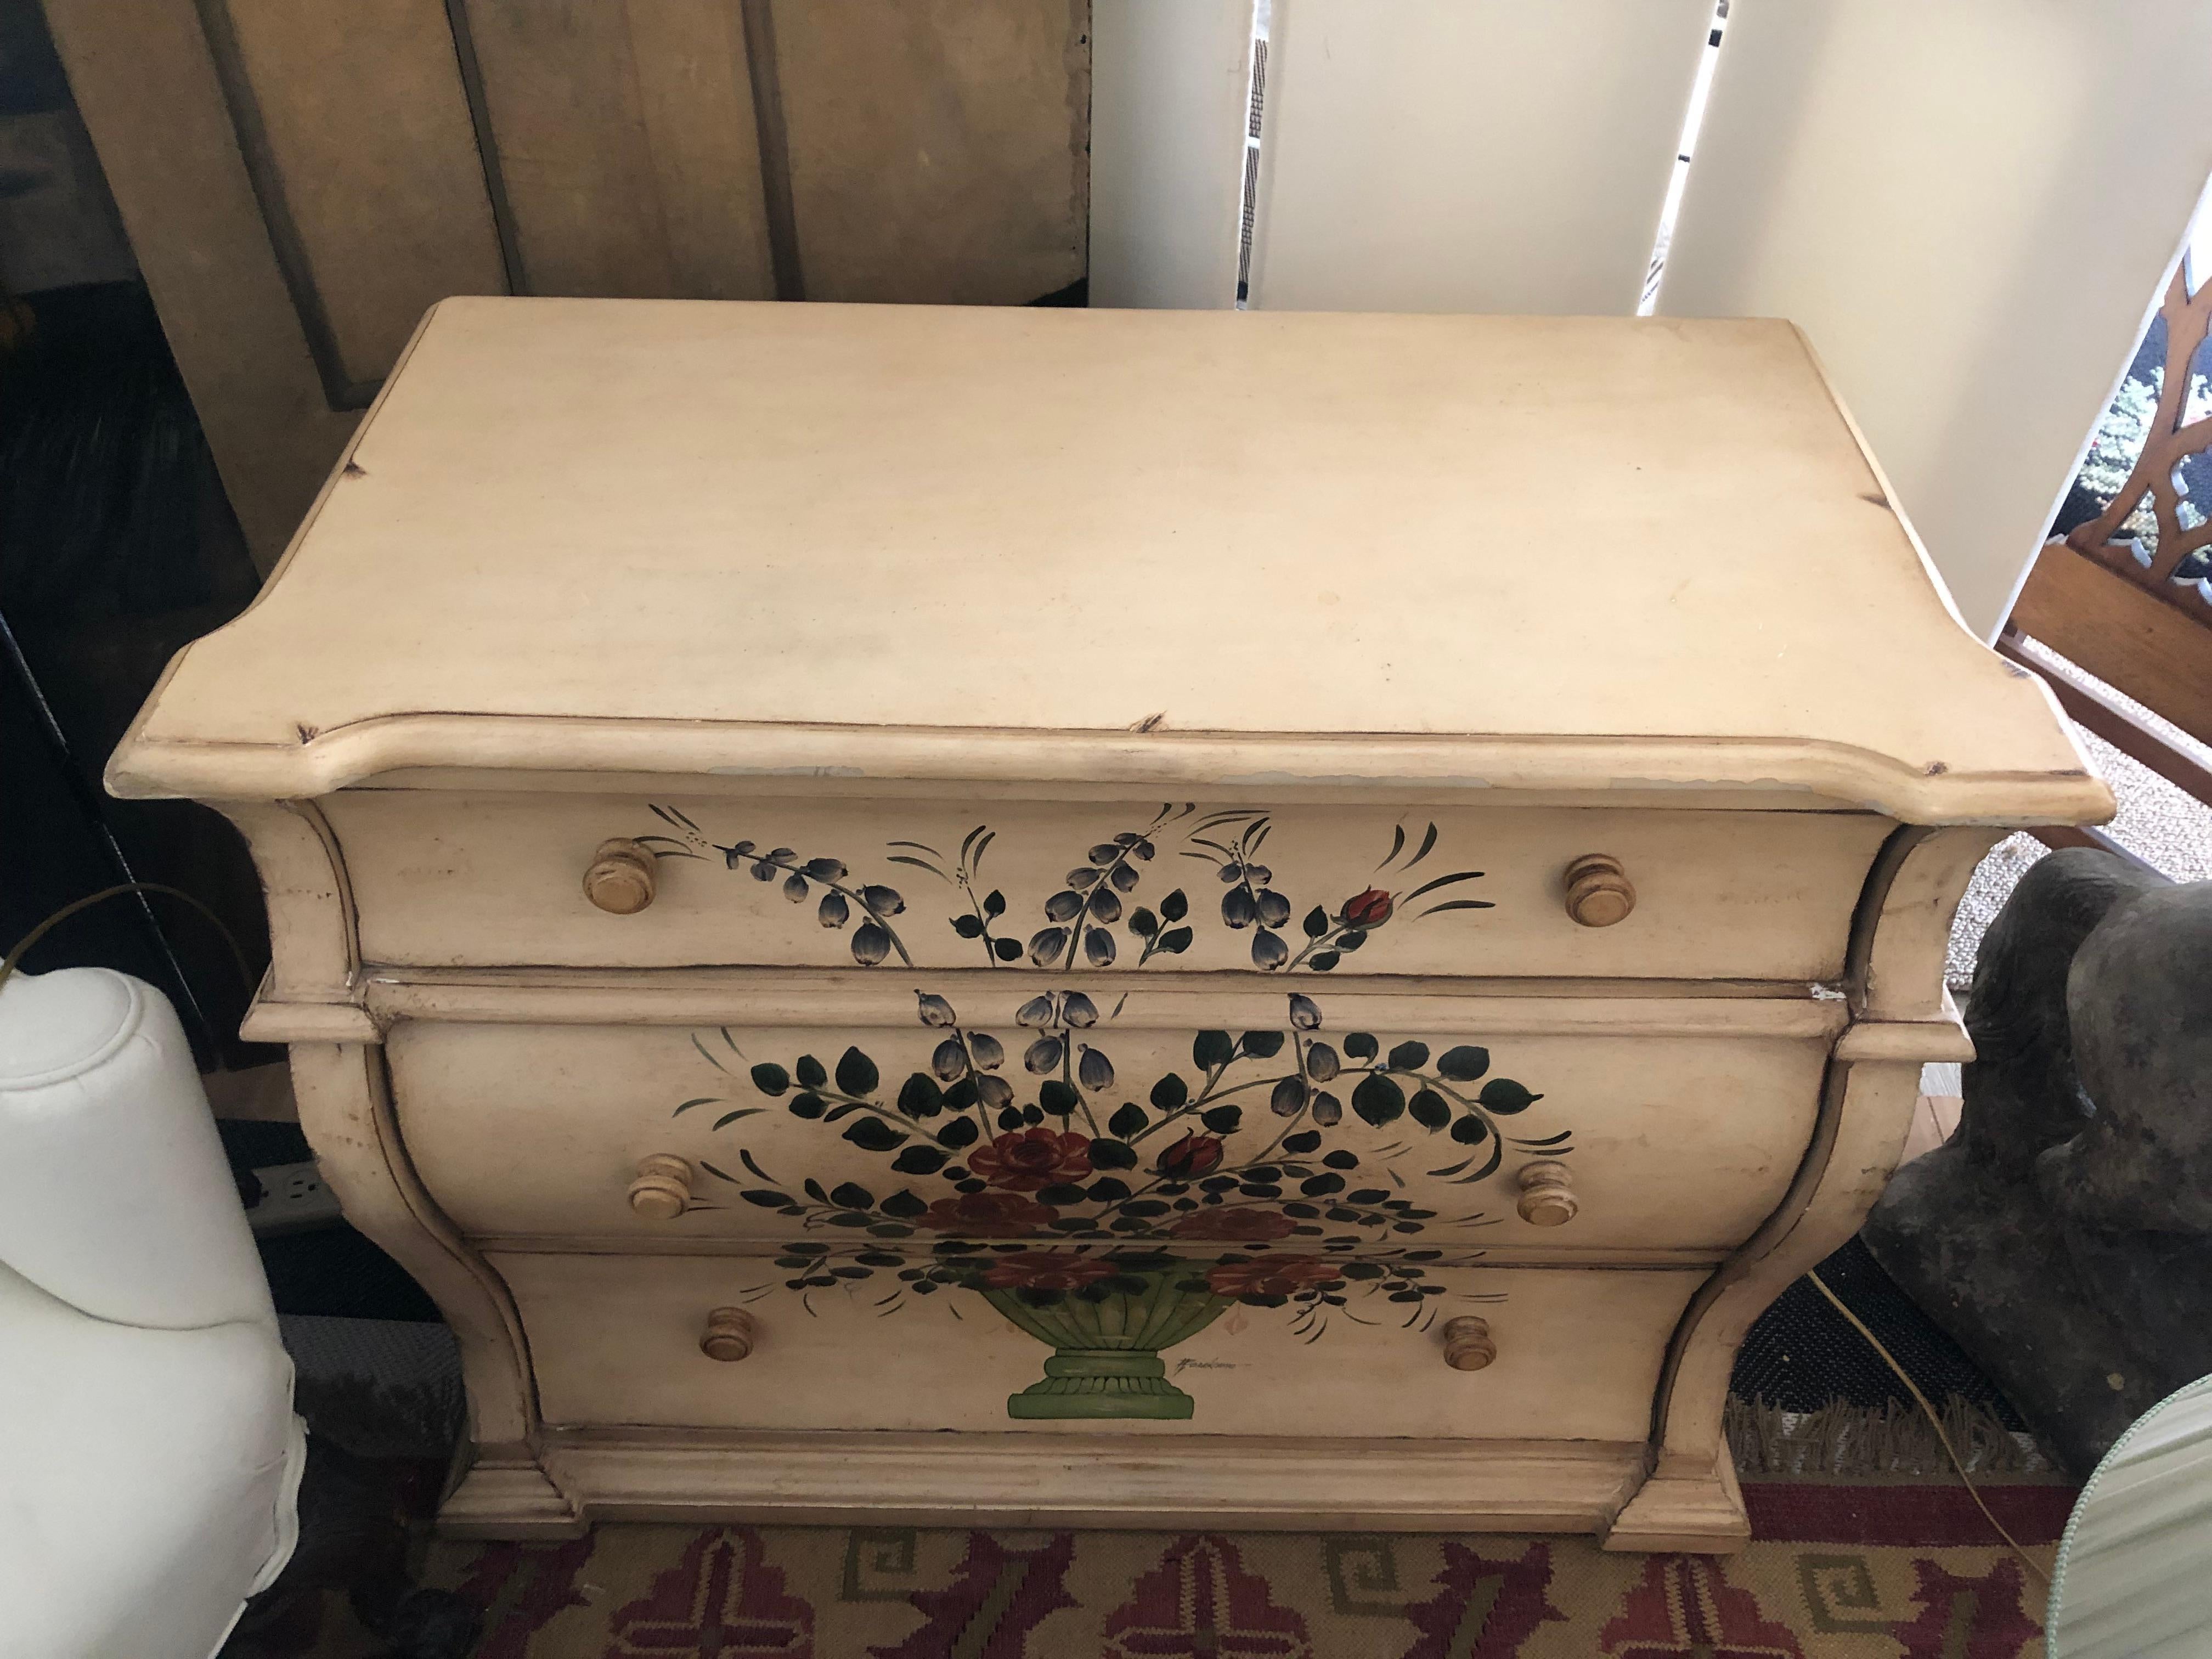 A pretty hand painted vintage medium sized dresser having 3 drawers and a bowed shape. The background is an antiqued white with a floral arrangement in a green urn painted on the front.